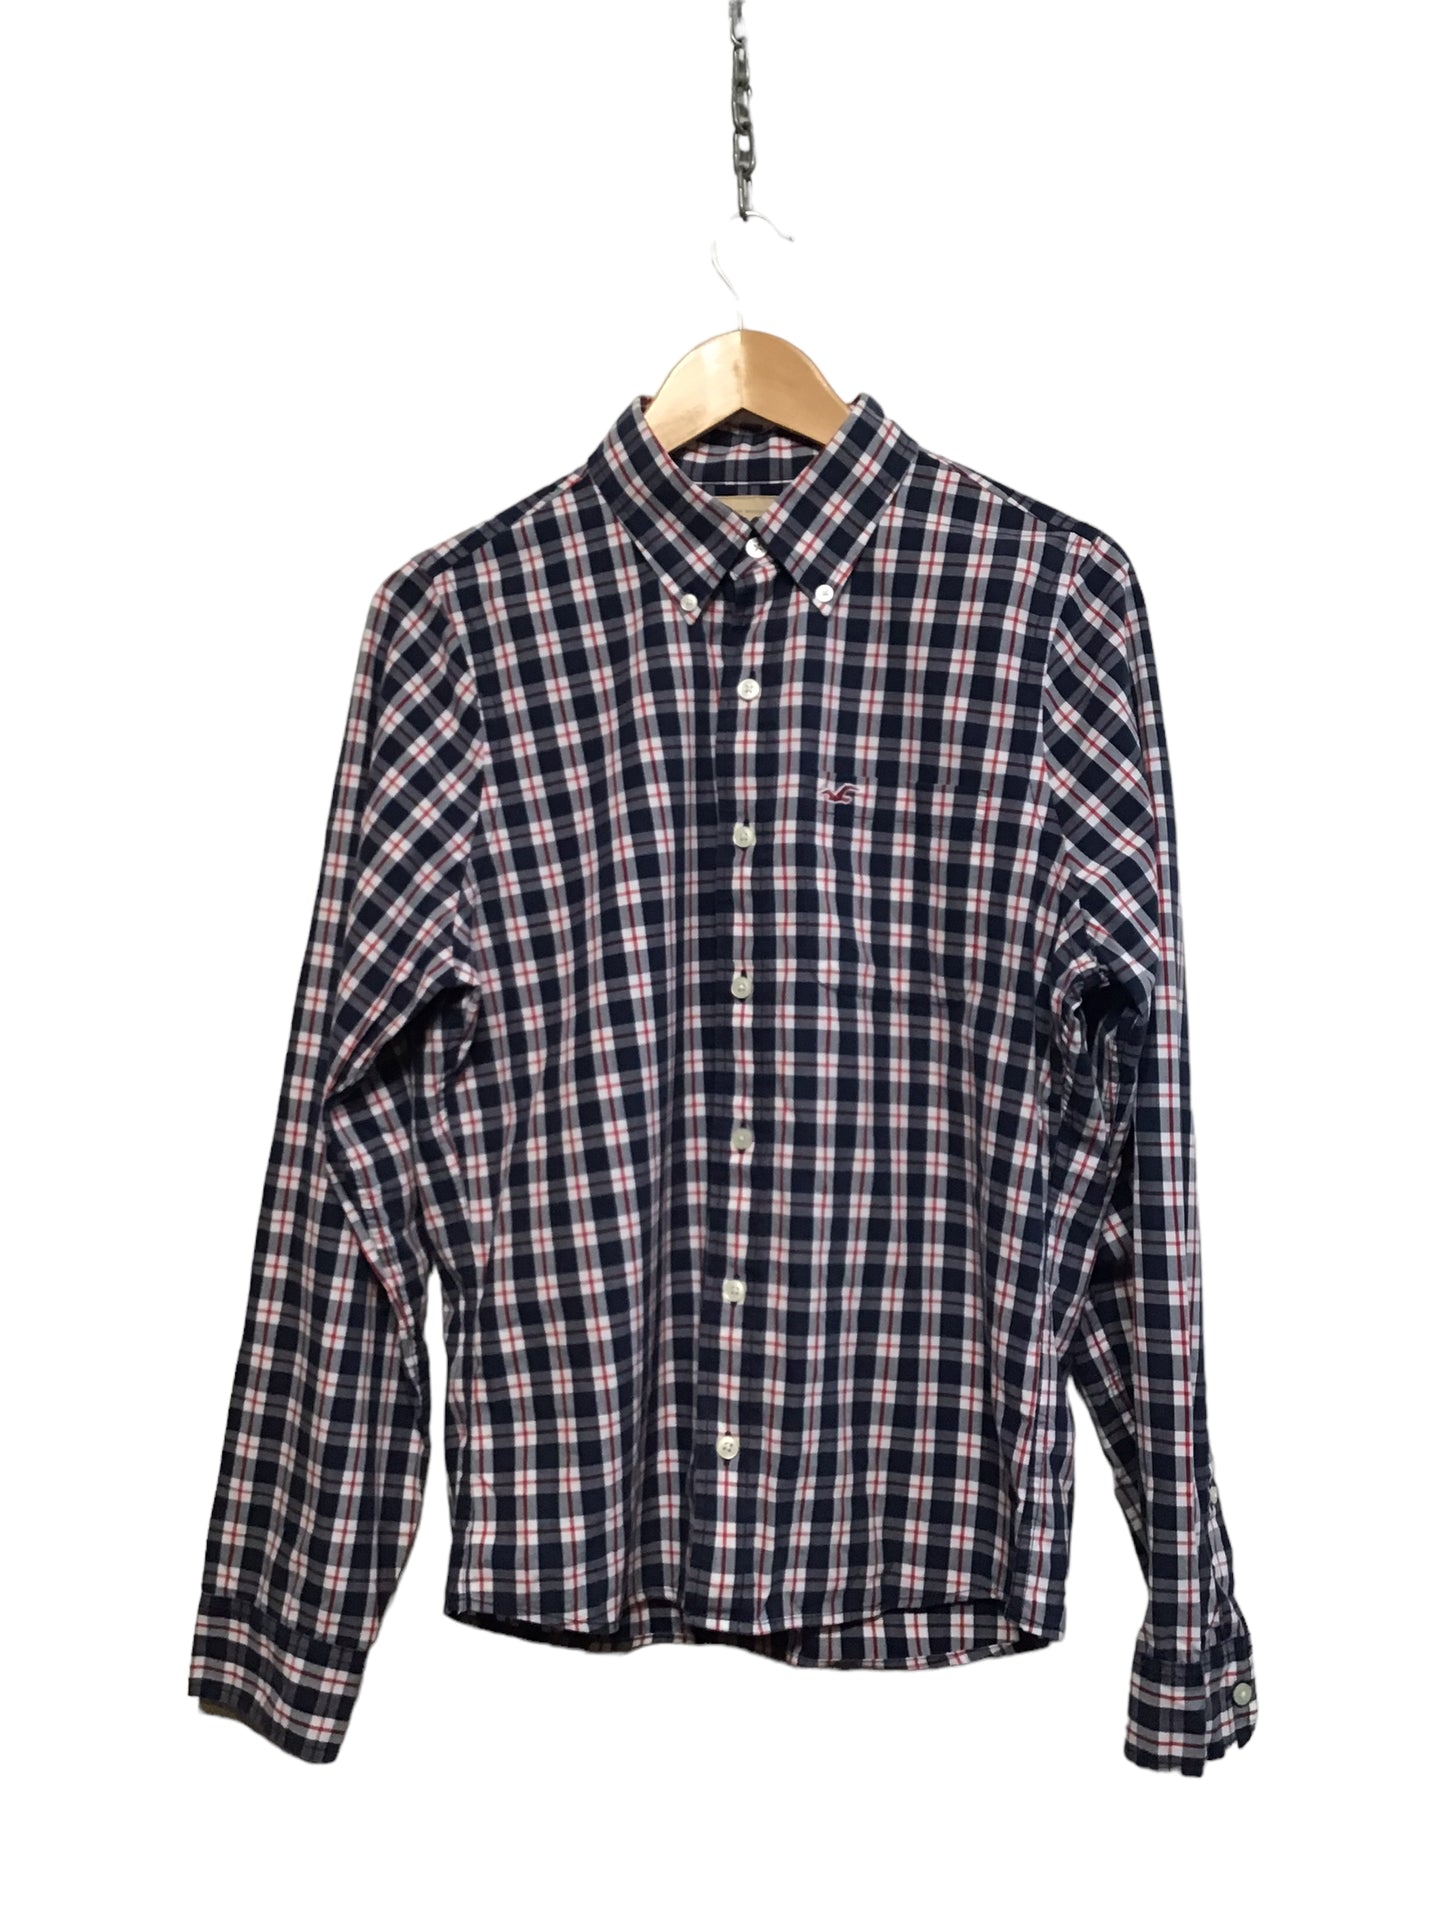 Hollister Checked Shirt (Size M)